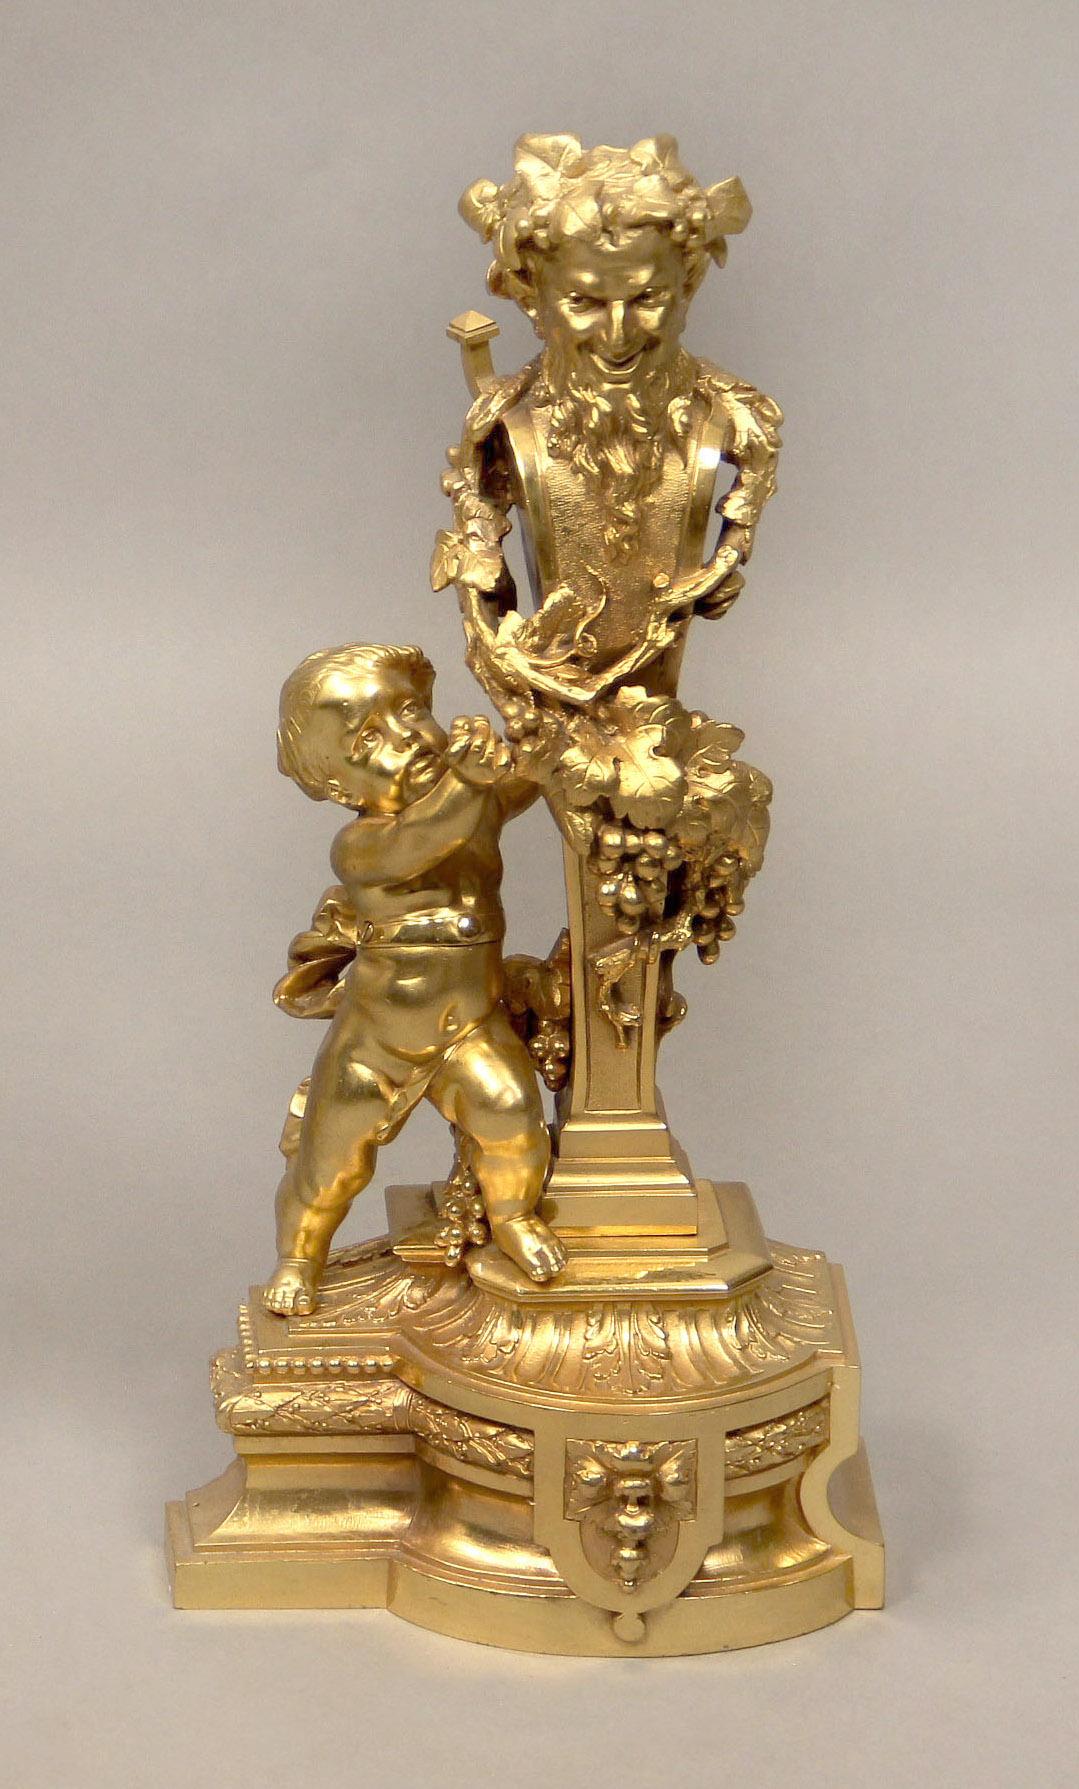 An interesting pair of late 19th century gilt bronze chenets

Each depicting Bacchus, wrapped in grape vines, flanked by a cherub and standing on a bronze base.